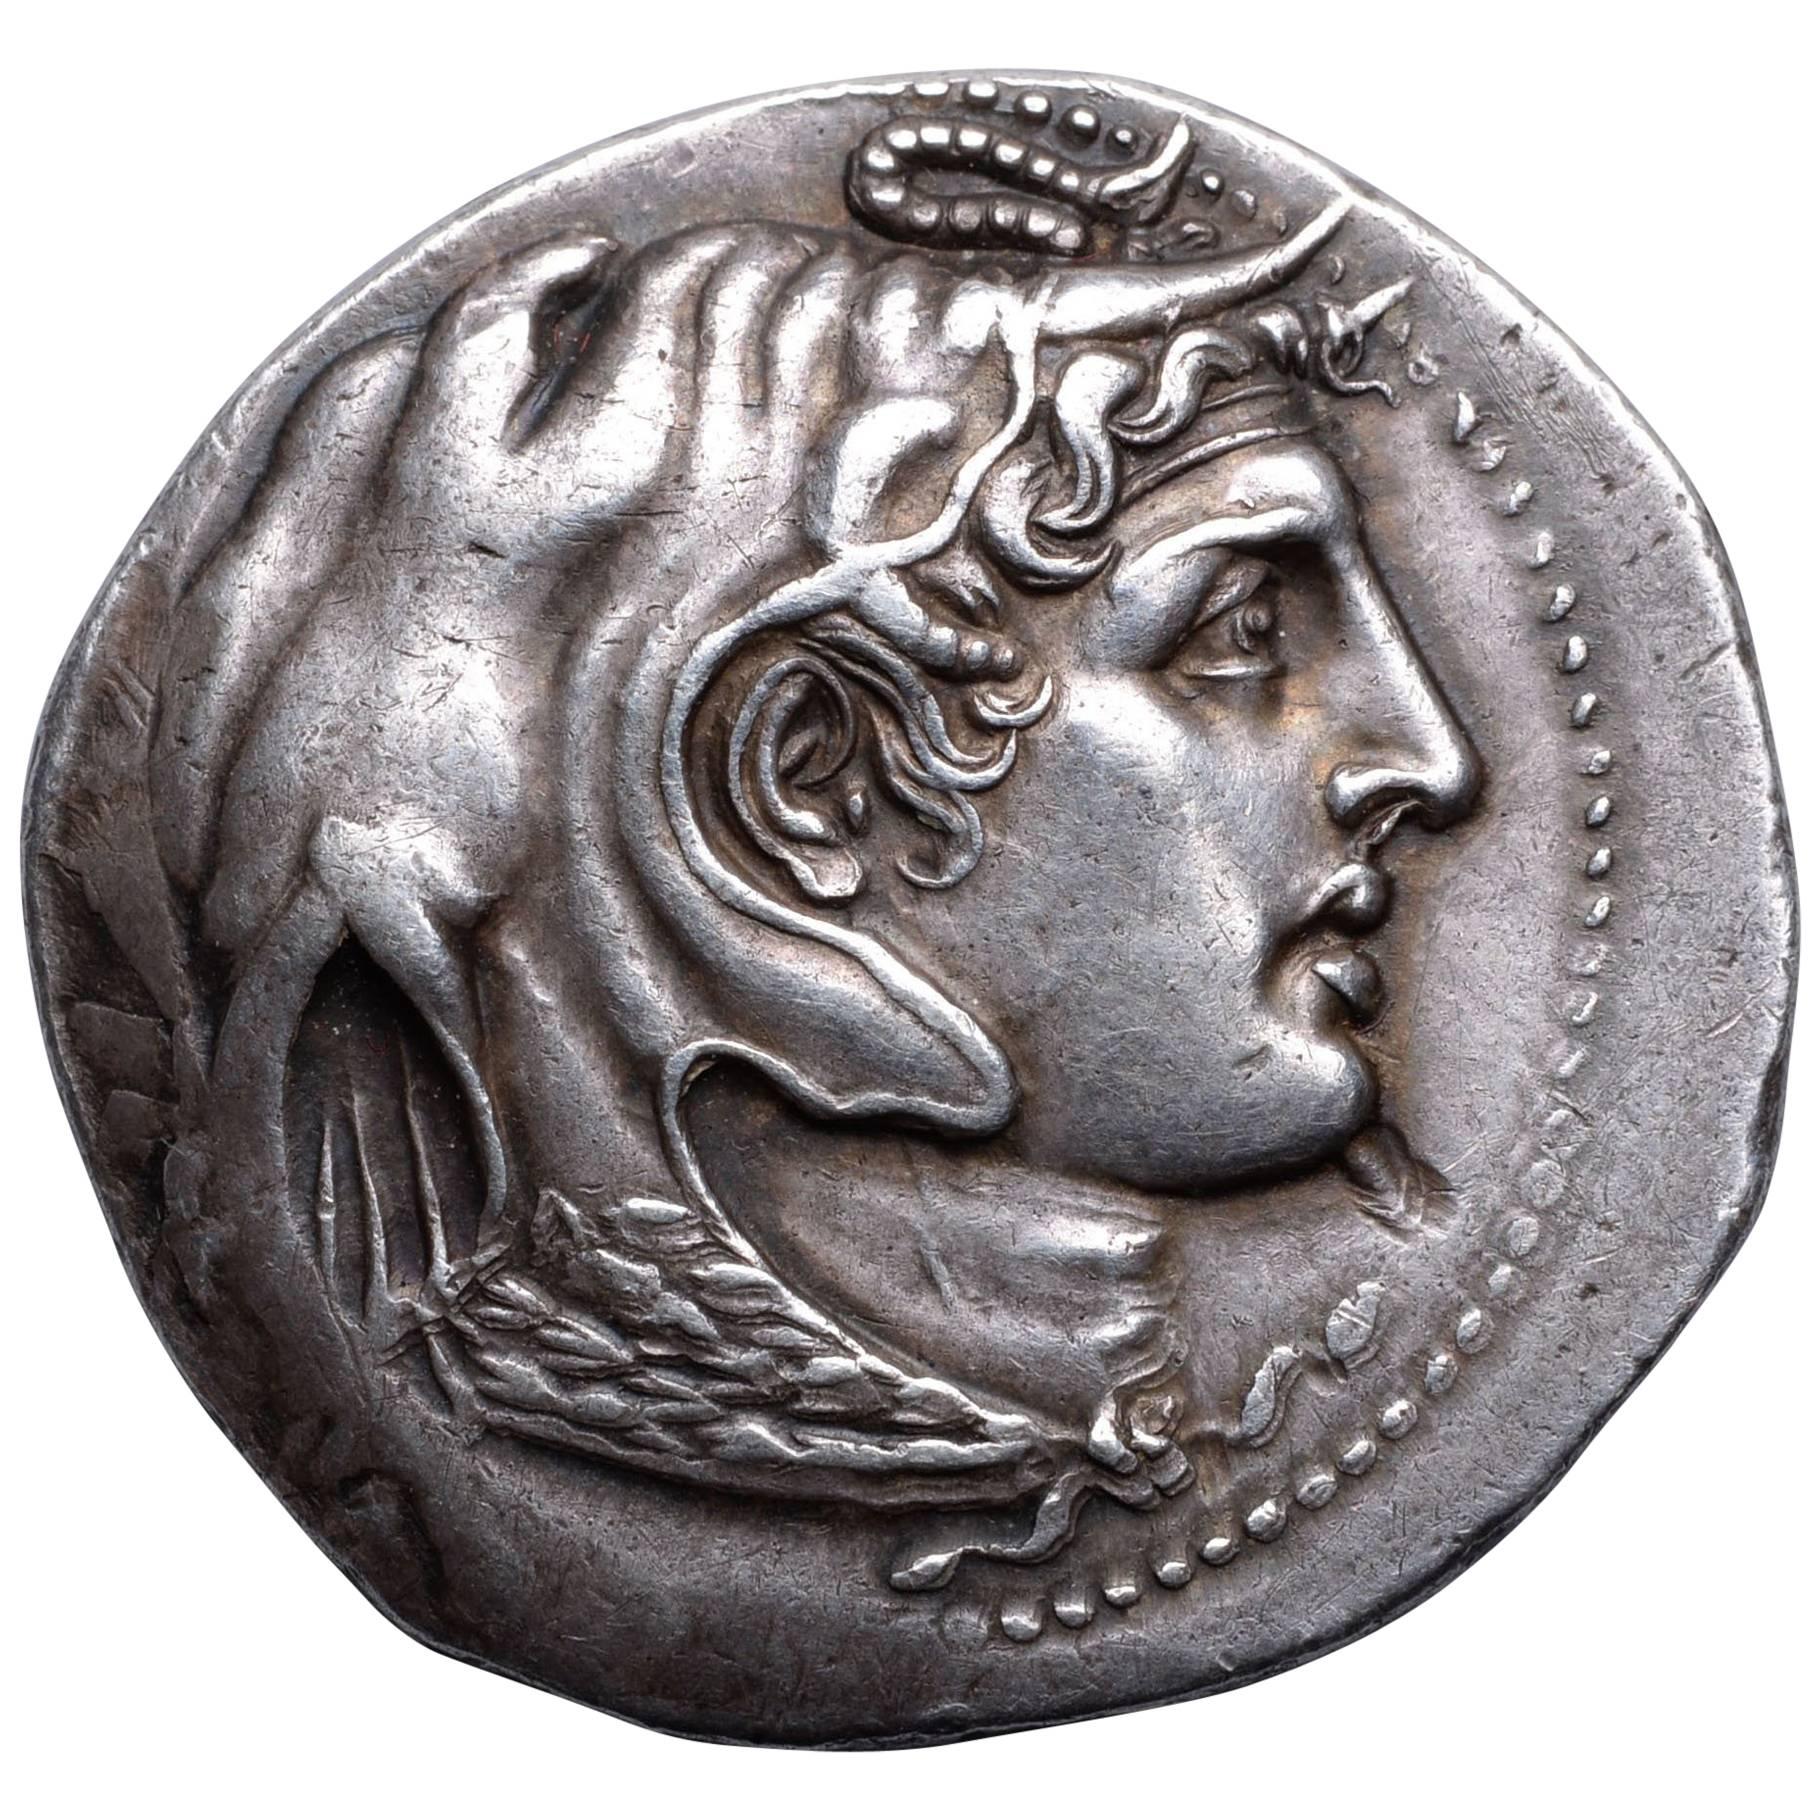 Ancient Greek Silver Coin with the Portrait of Alexander the Great - 310 Bc